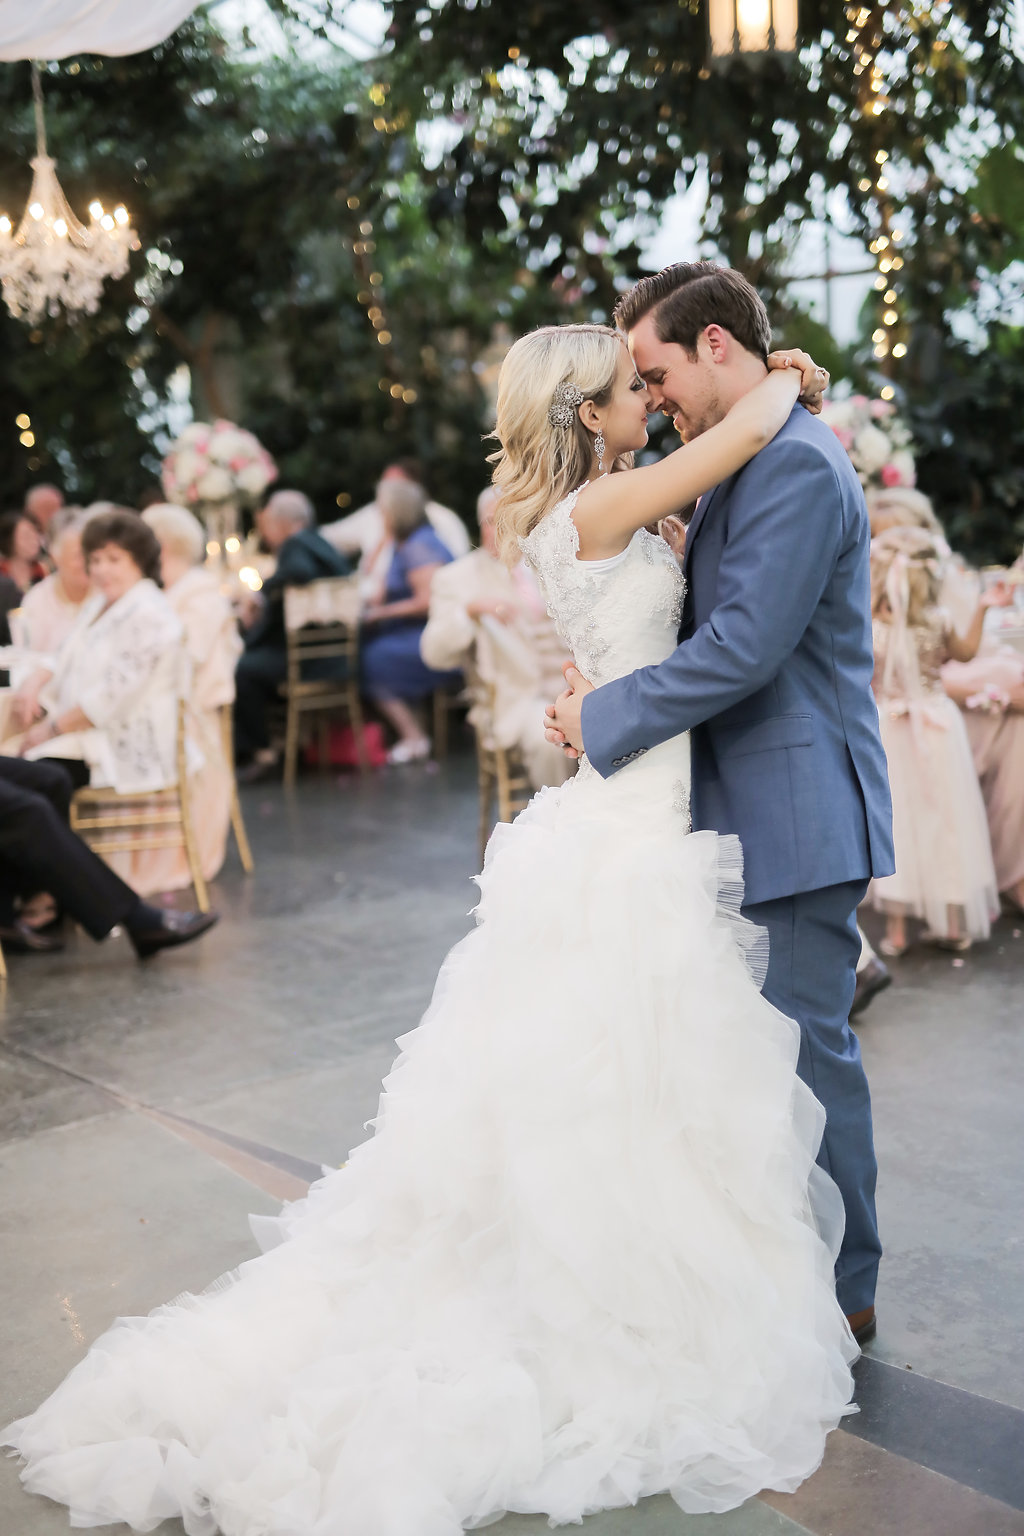 Fairytale Wedding at La Caille | La Caille Wedding Wedding | Salt Lake City Wedding | Blush and Gold | Michelle Leo Events | Utah Event Planner and Designer | Pepper Nix Photography